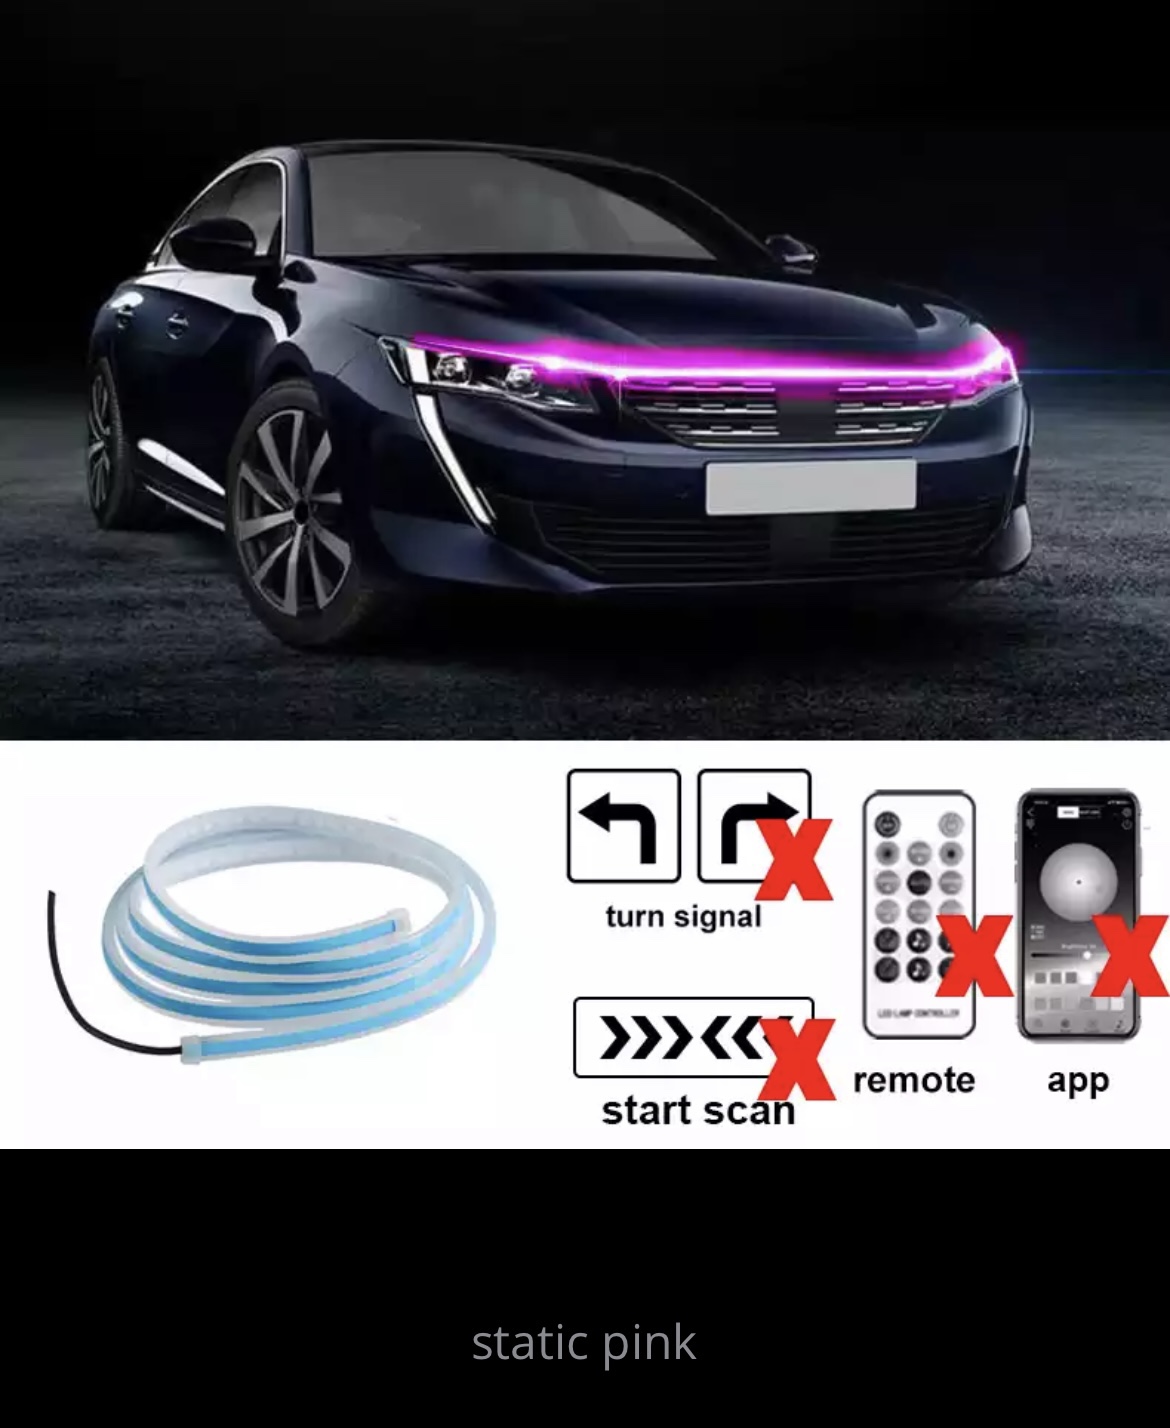 2023 Newest LED Car Hood Light Daytime Running Lights Auto Remote App RGB Flowing Turn Signal Guide Thin Strip Lamp Styling 12V